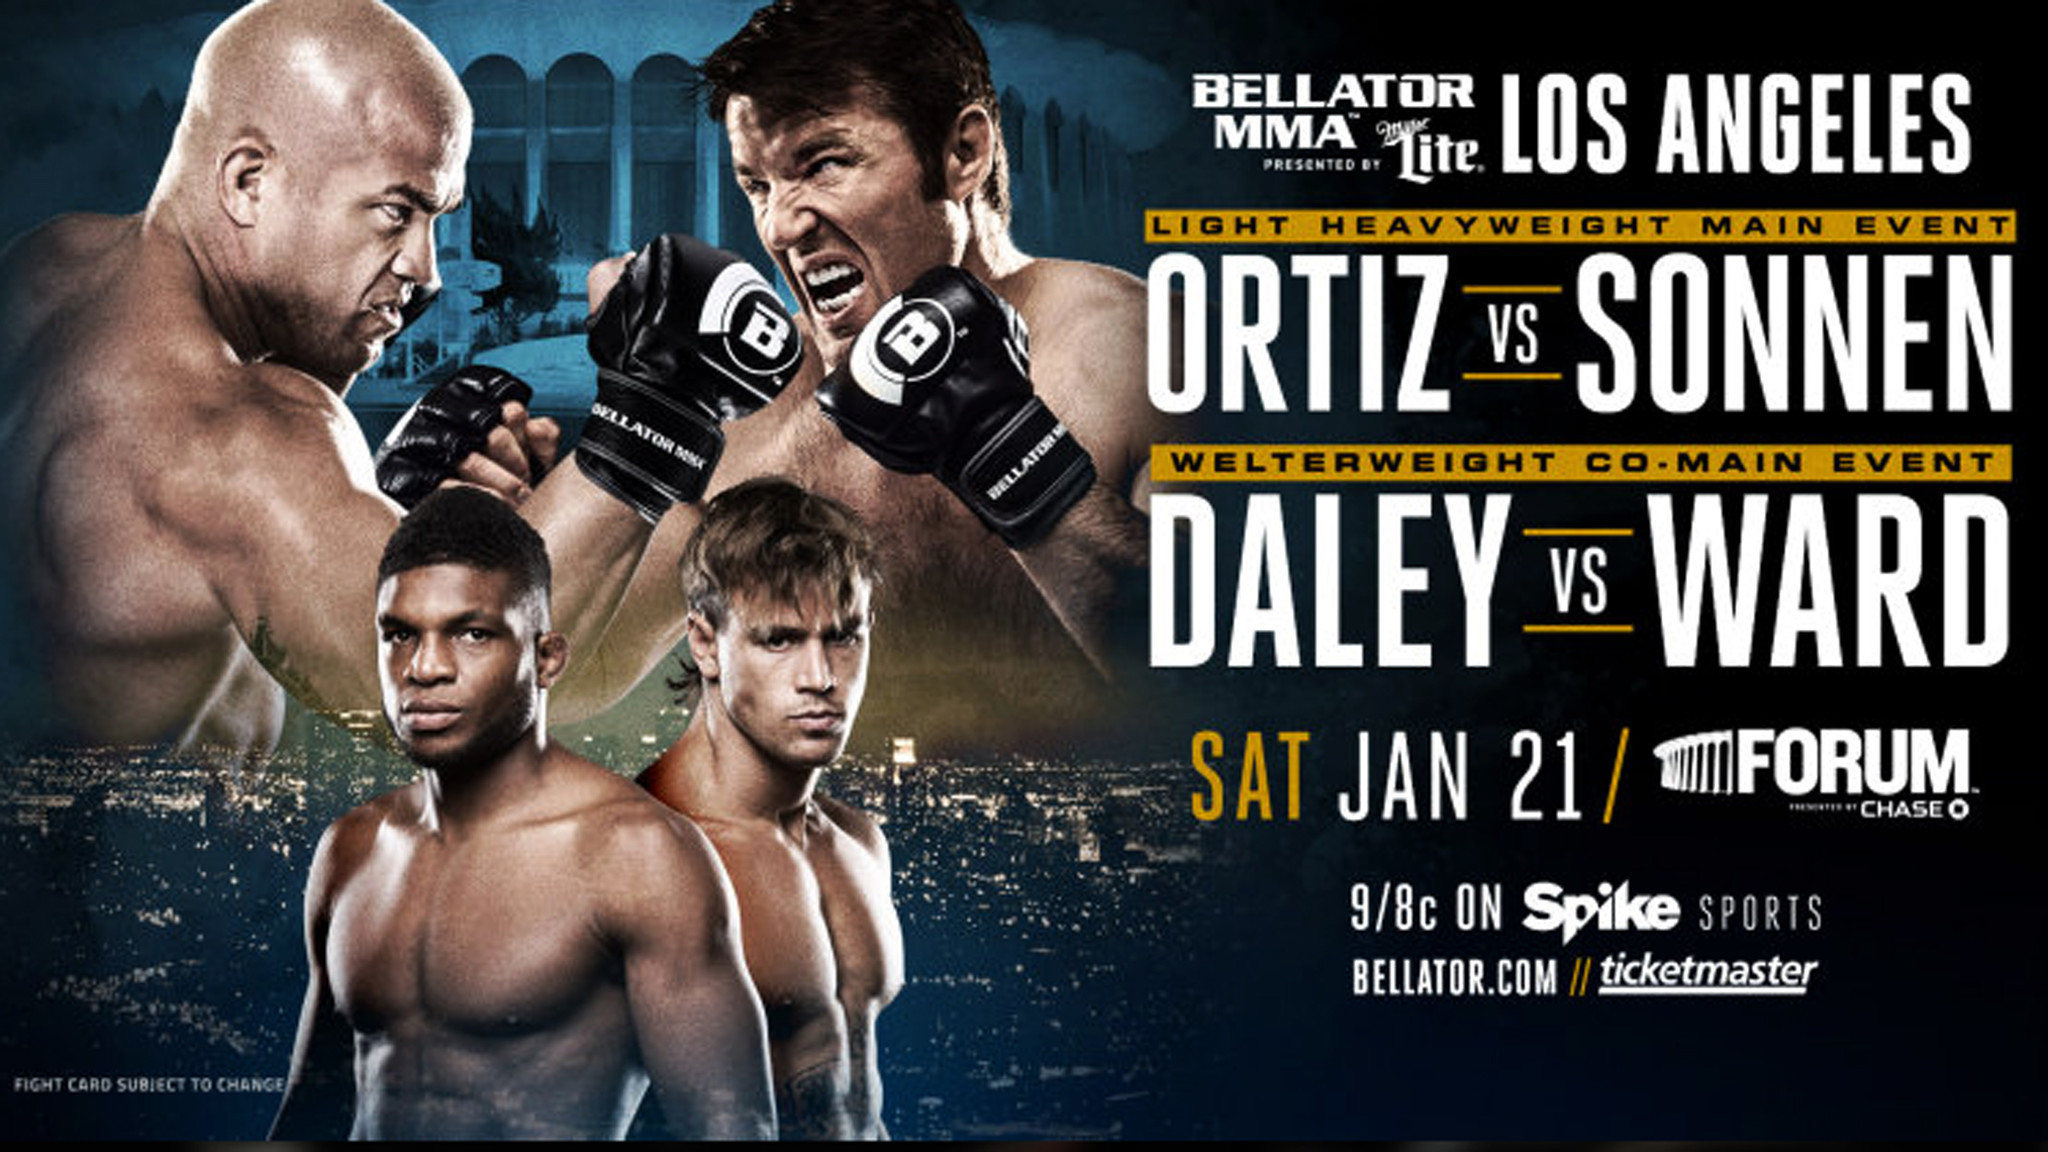 Bellator goes after free agents as it digs in as alternative to UFC - LA Times2048 x 1152